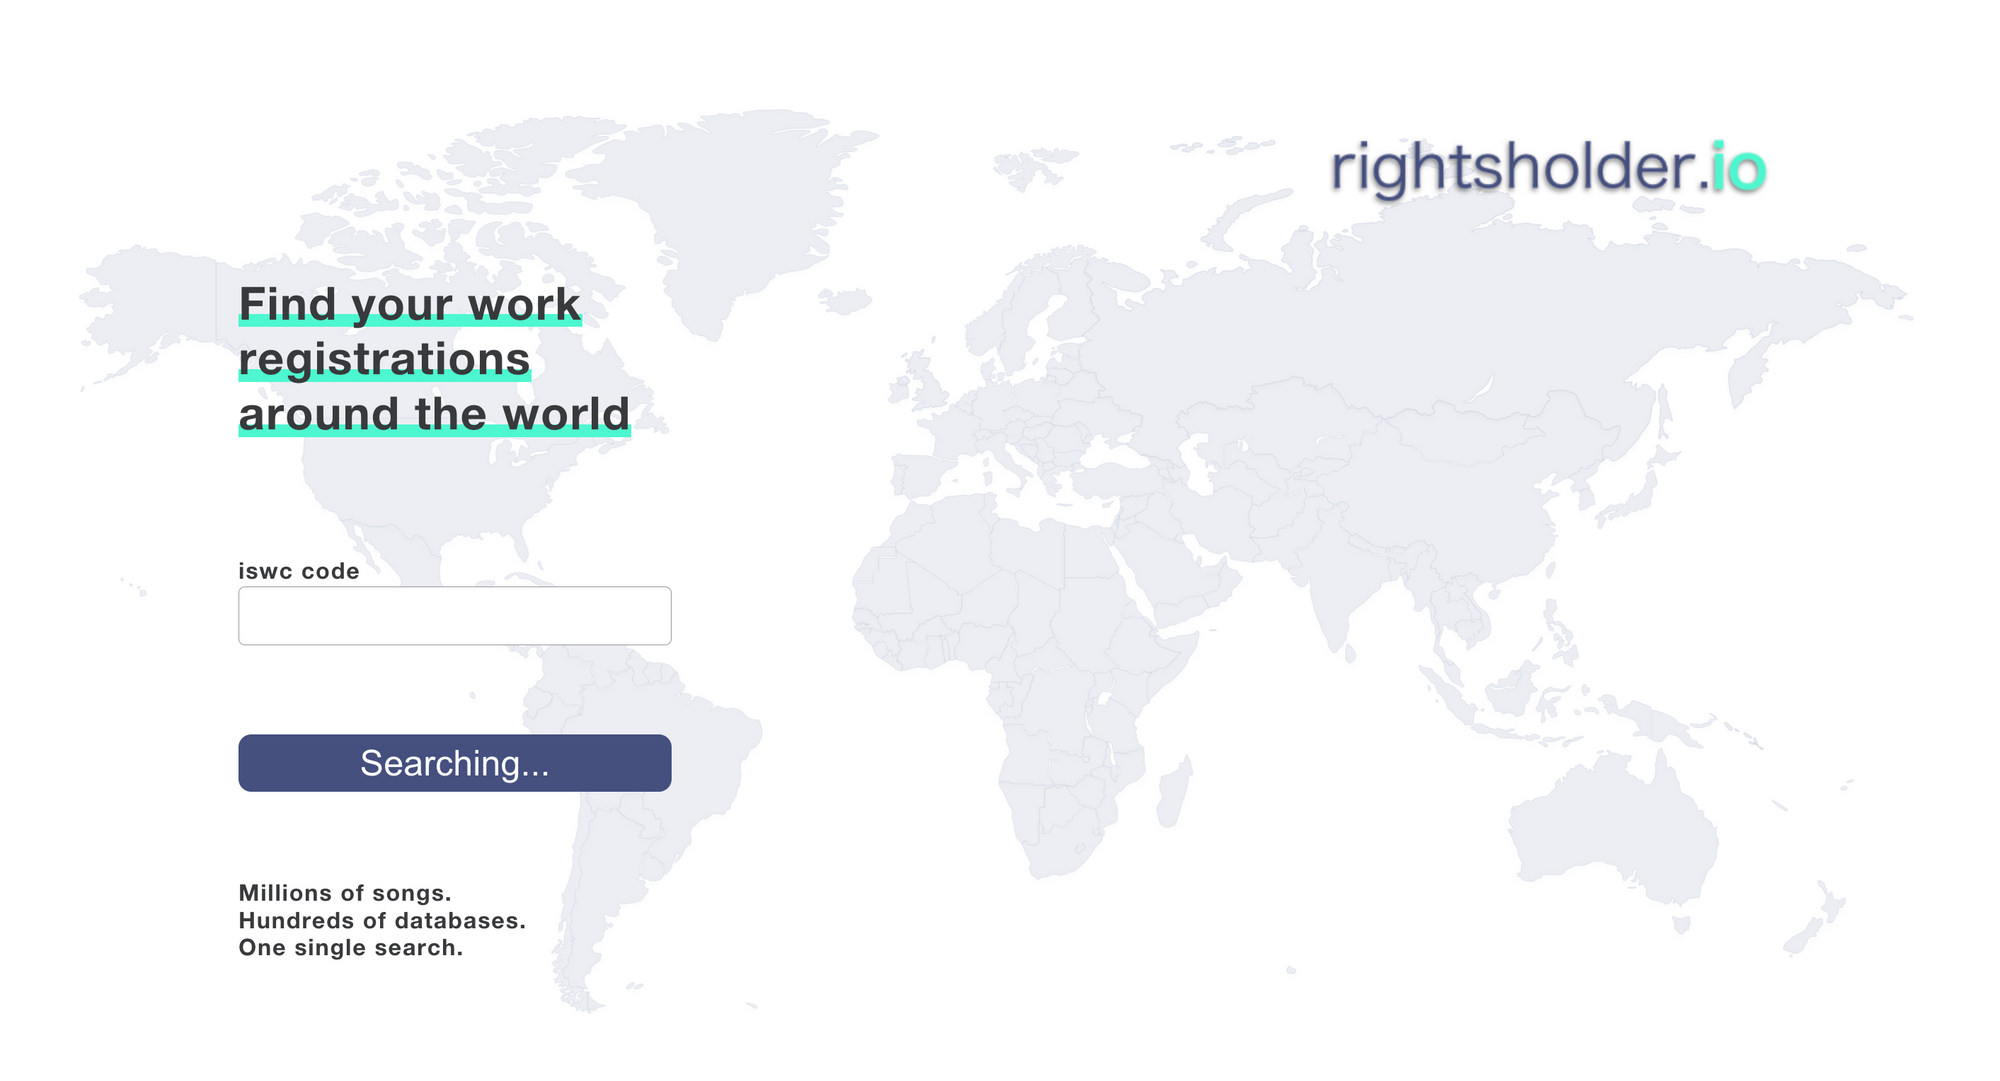 rightsholder.io Launches New Tool WorldSearch for Music Publishers